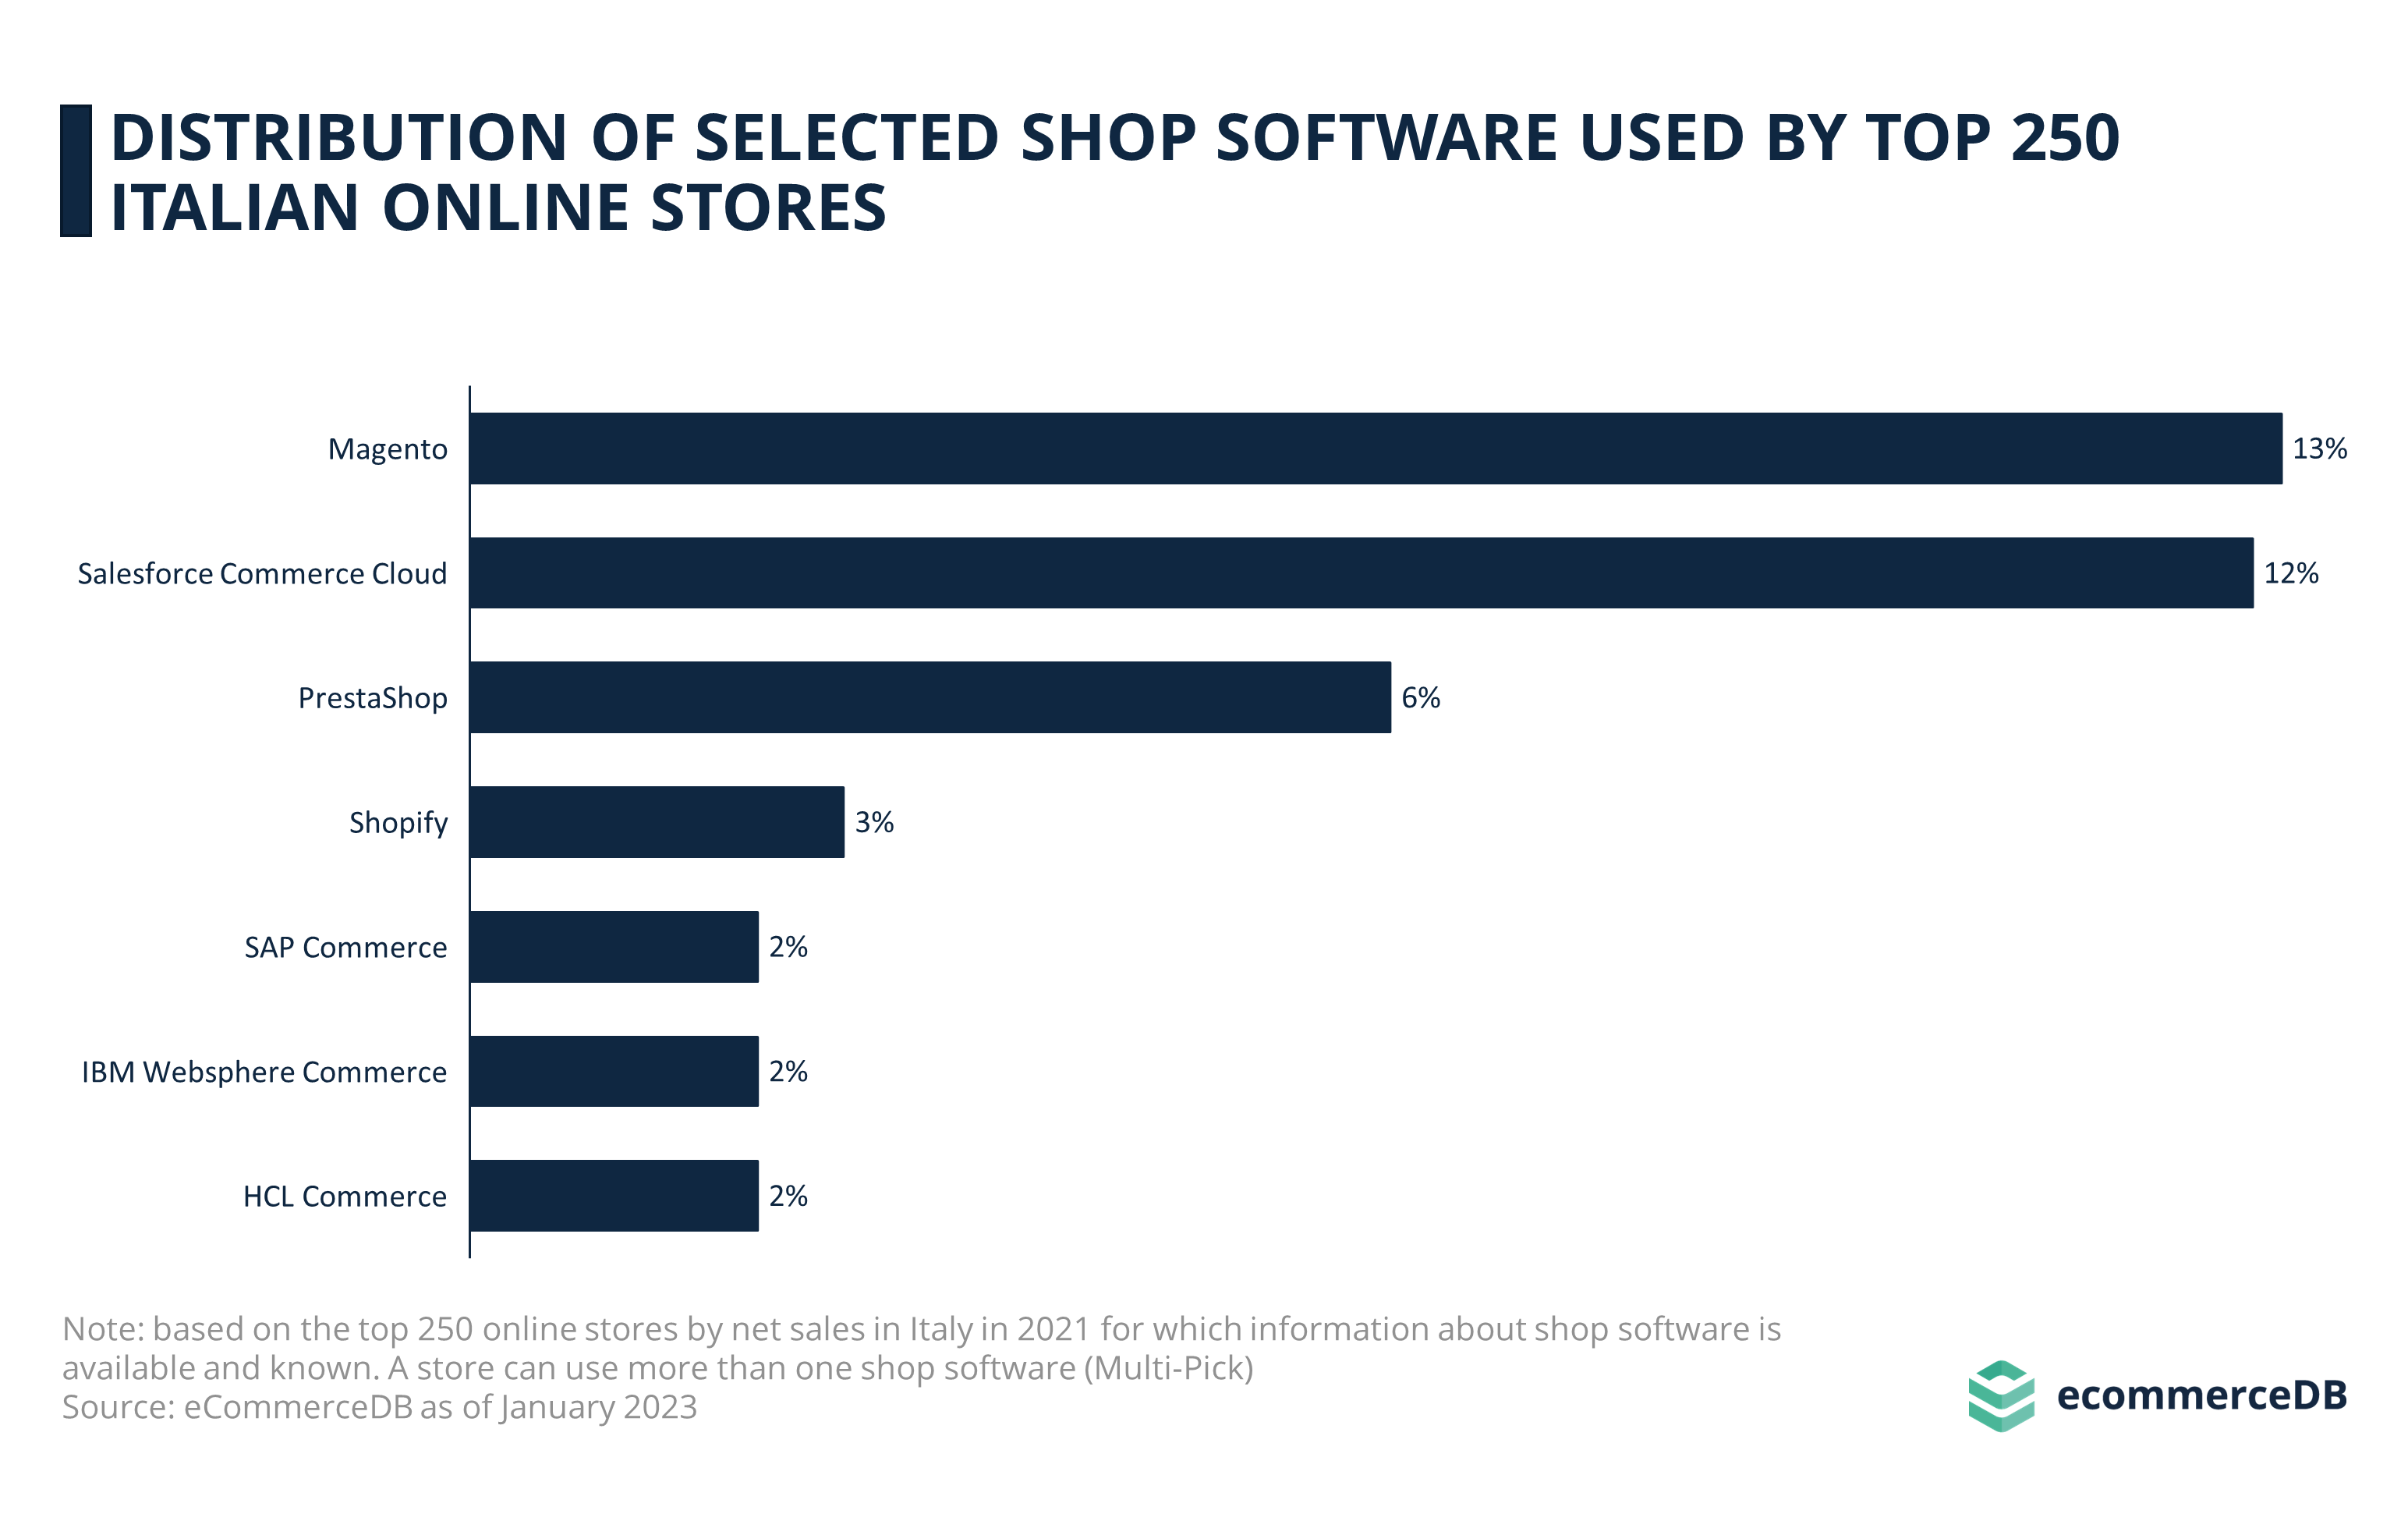 Distribution of Selected Shop Software Used by Top 250 Italian Online Stores